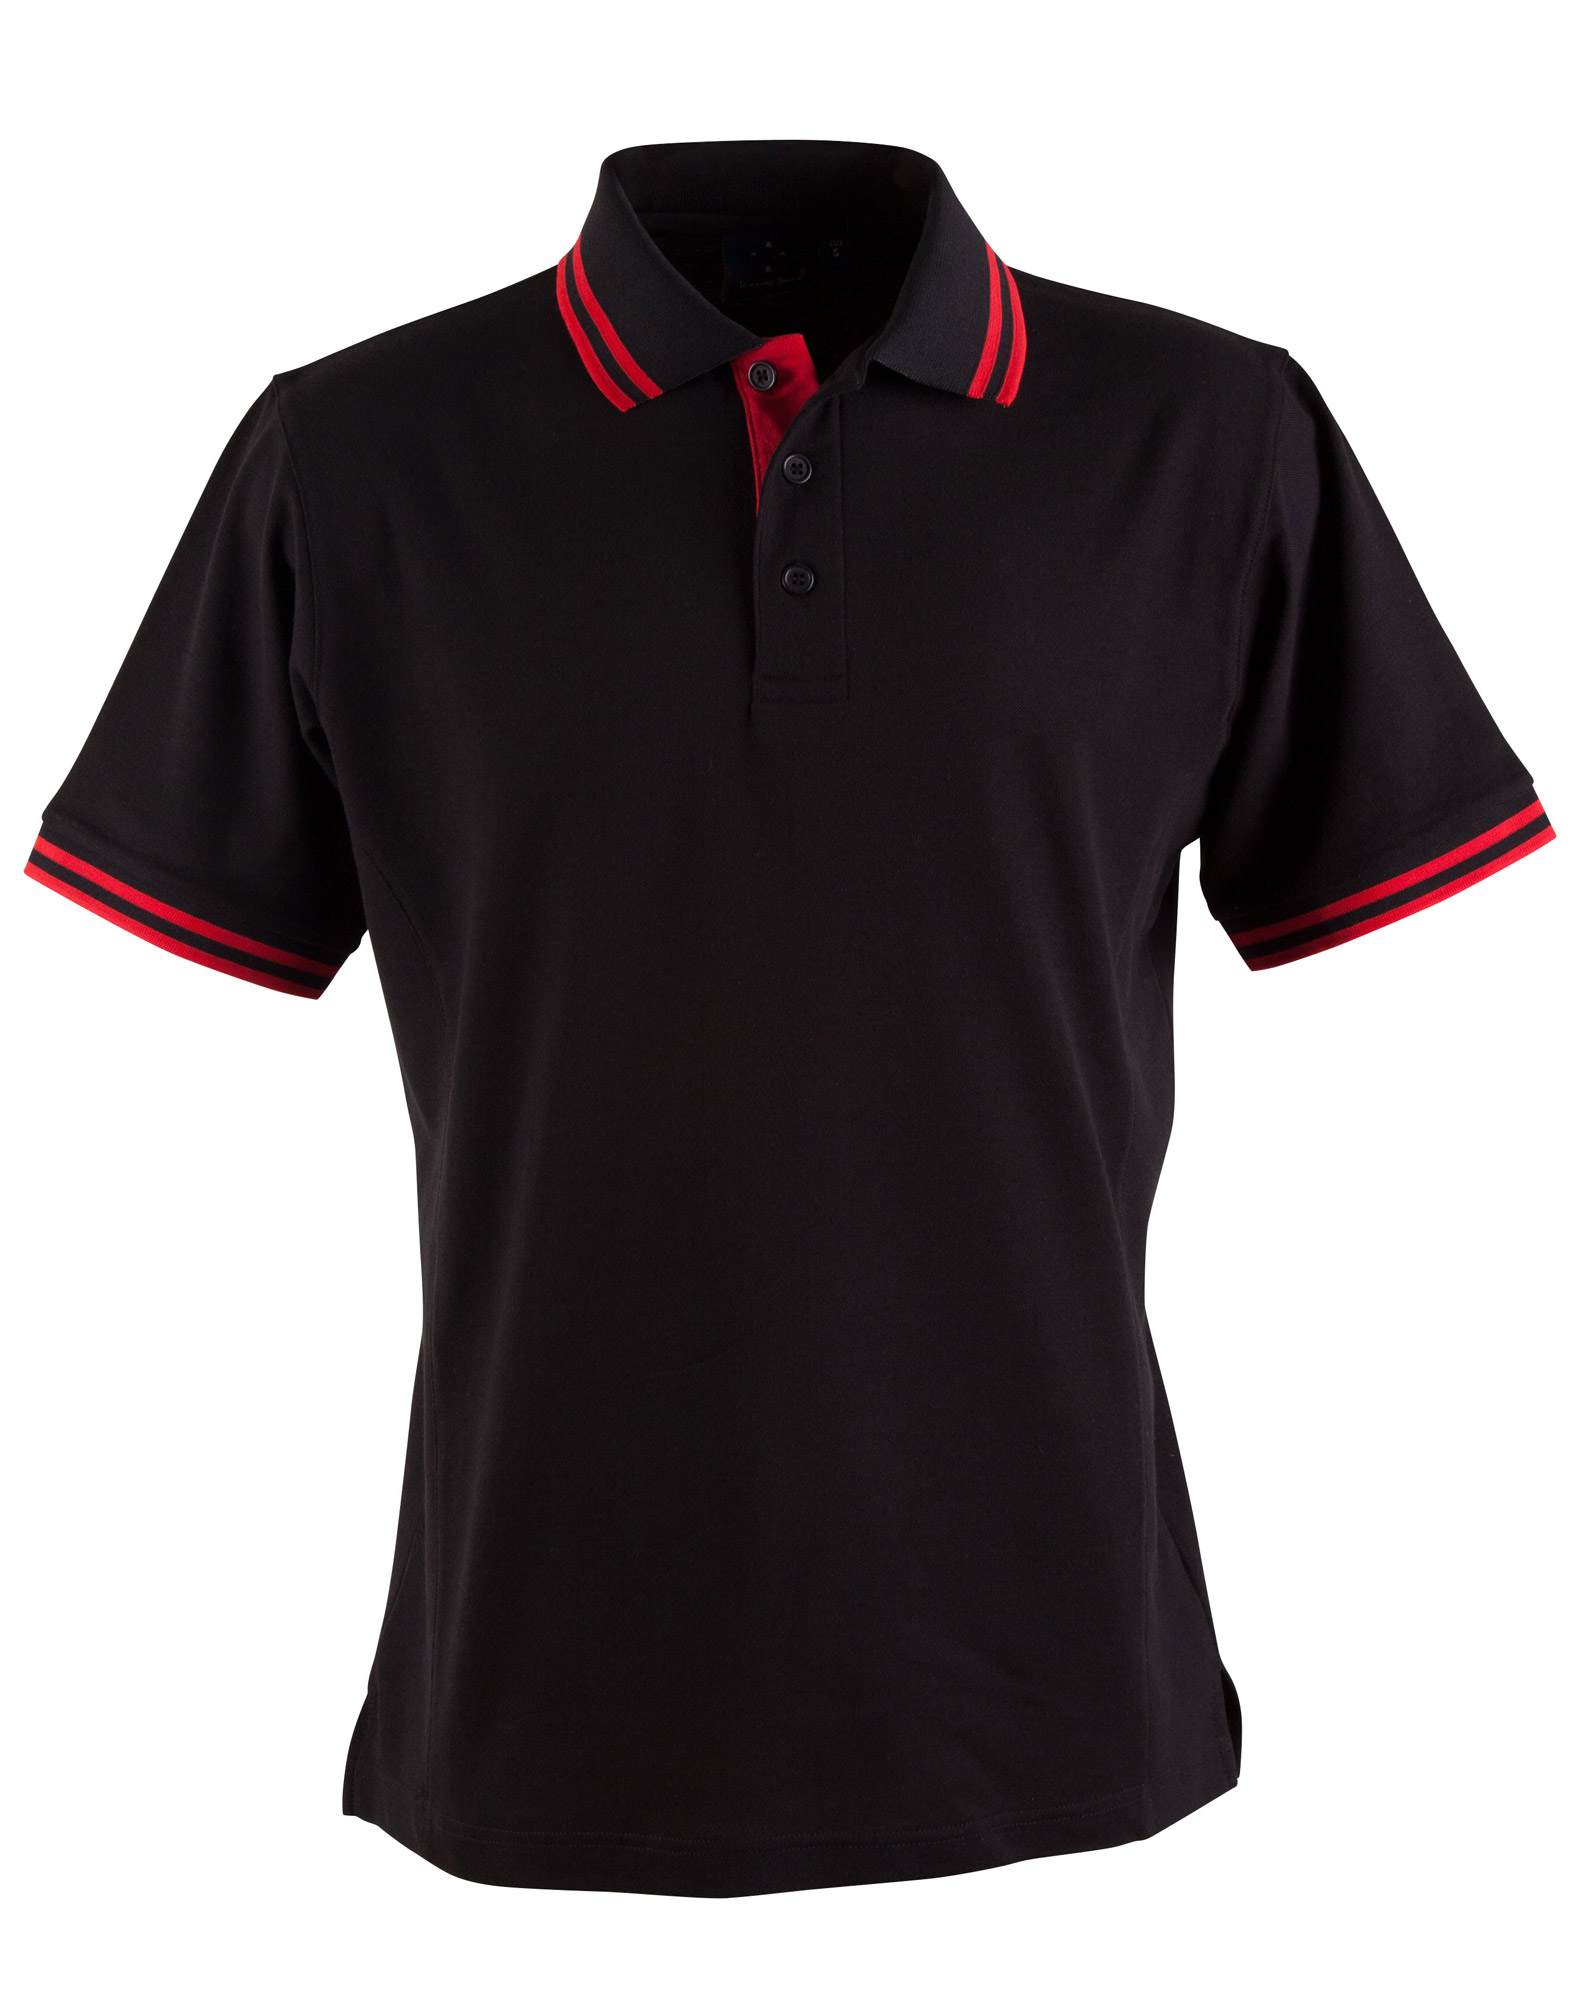 Men's and Women's Grace TrueDry Pique Short Sleeve Polo - Black and Red